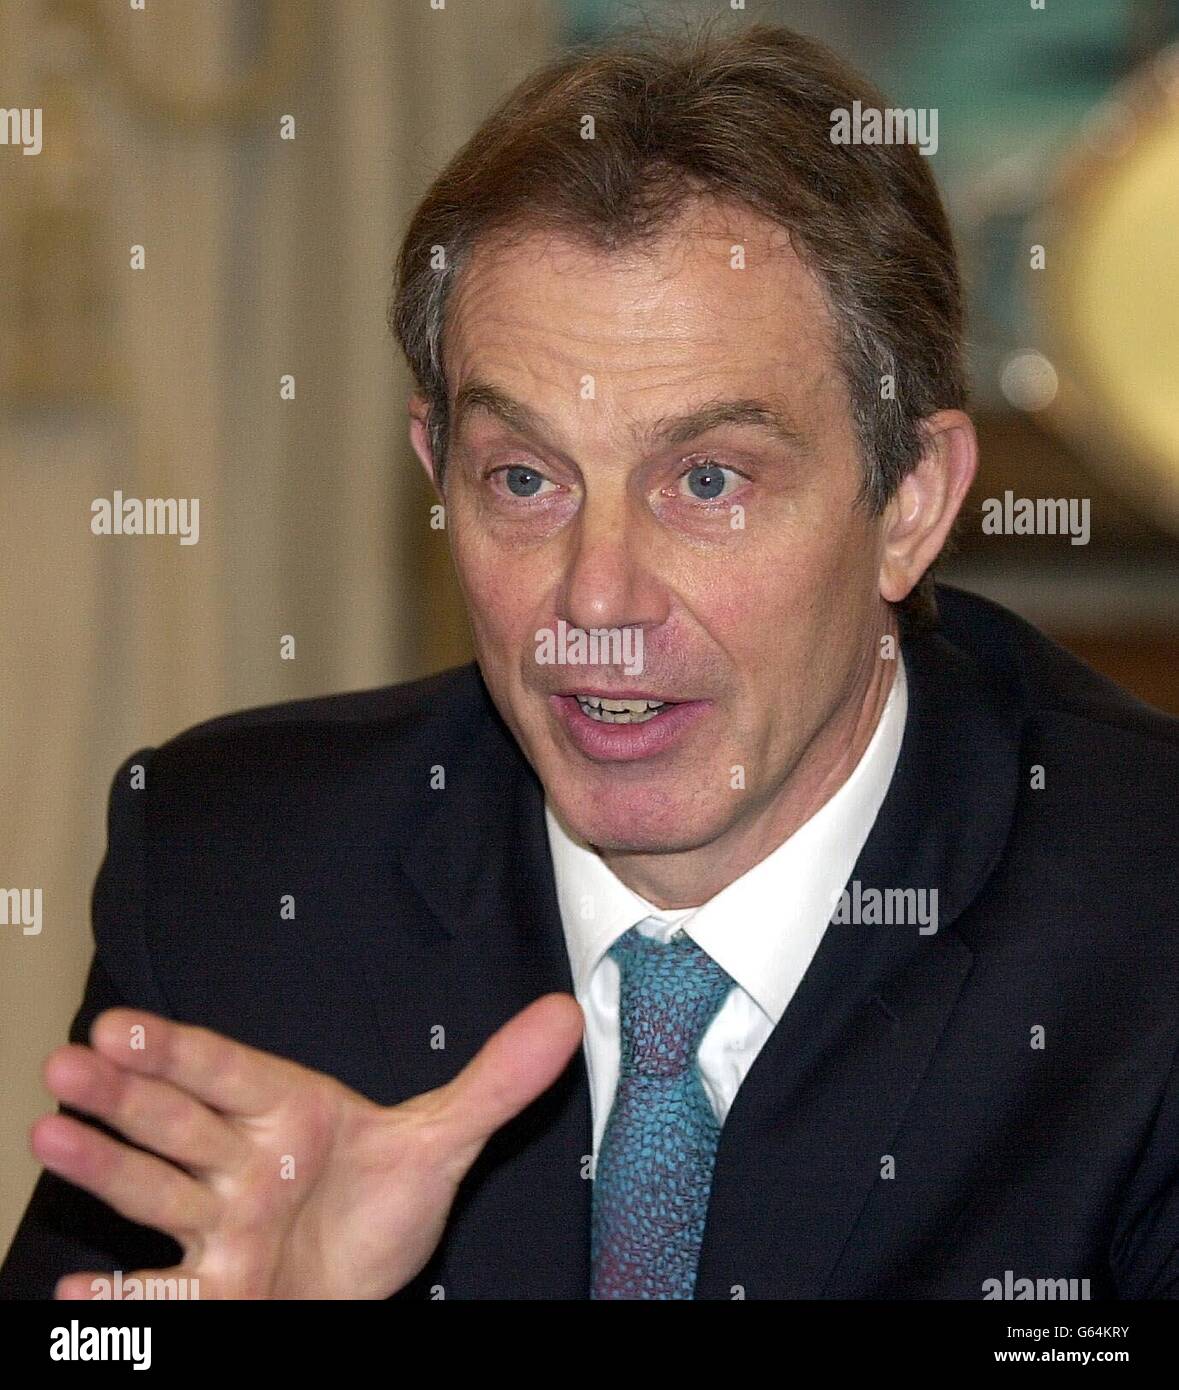 Prime Minister, Tony Blair speaks at a farmers and food producers meeting at No. 10 Downing Street, London. The food and farming sector will play an important role in improving the health of the nation, the Government has announced. * An action plan covering a wide range of issues is aimed at encouraging people to eat a better diet. Stock Photo